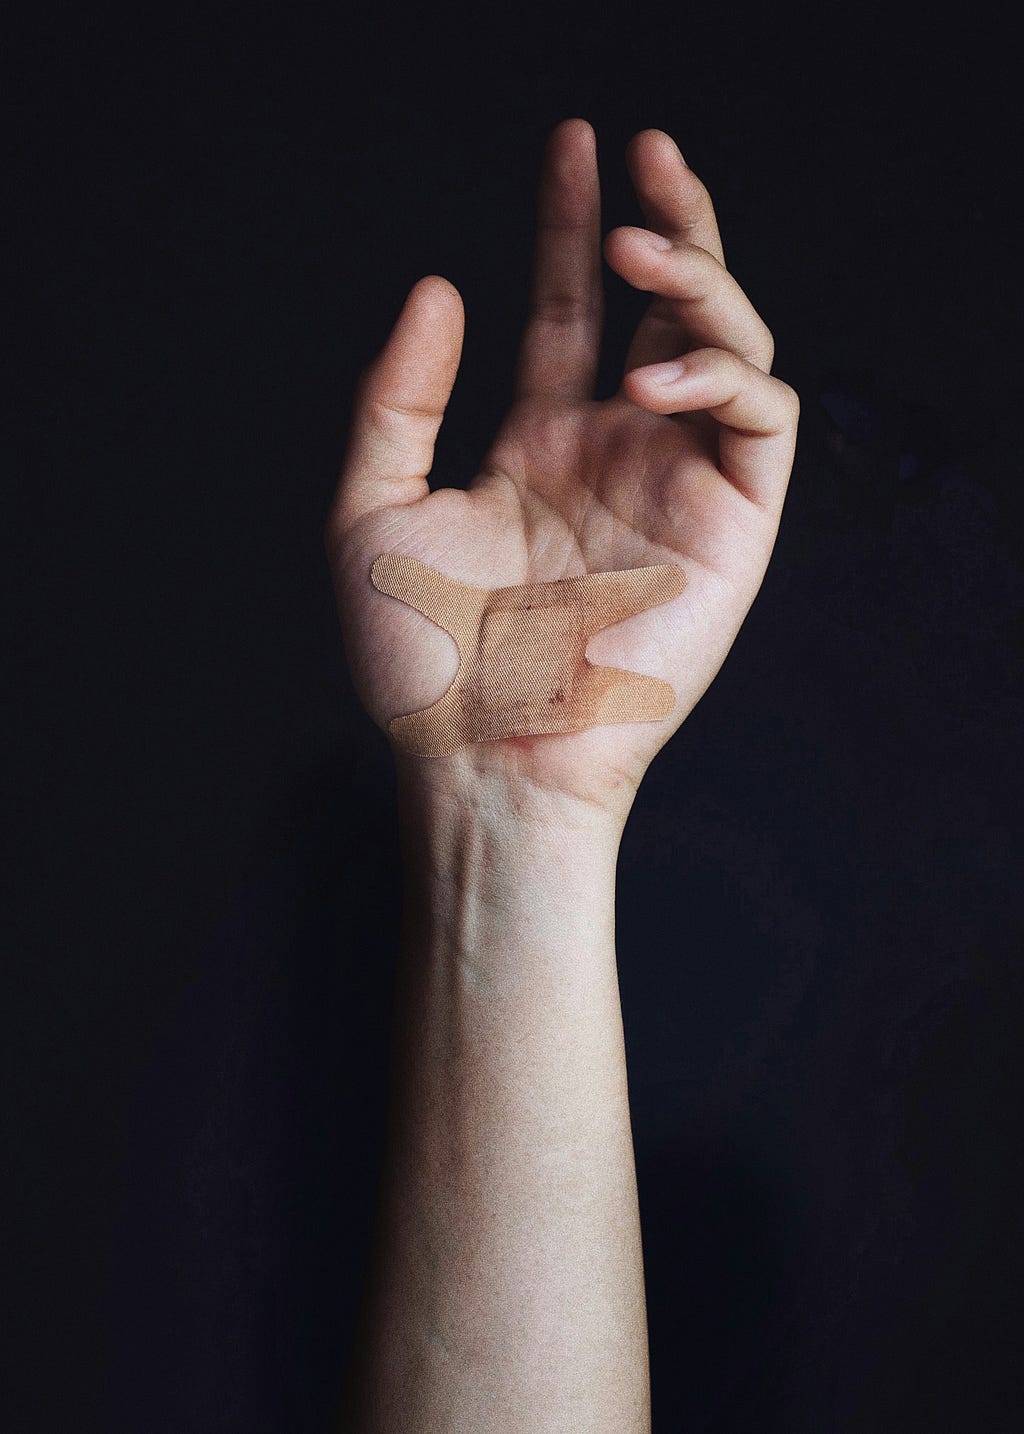 A photo of a hand with a cut and a bandage on it